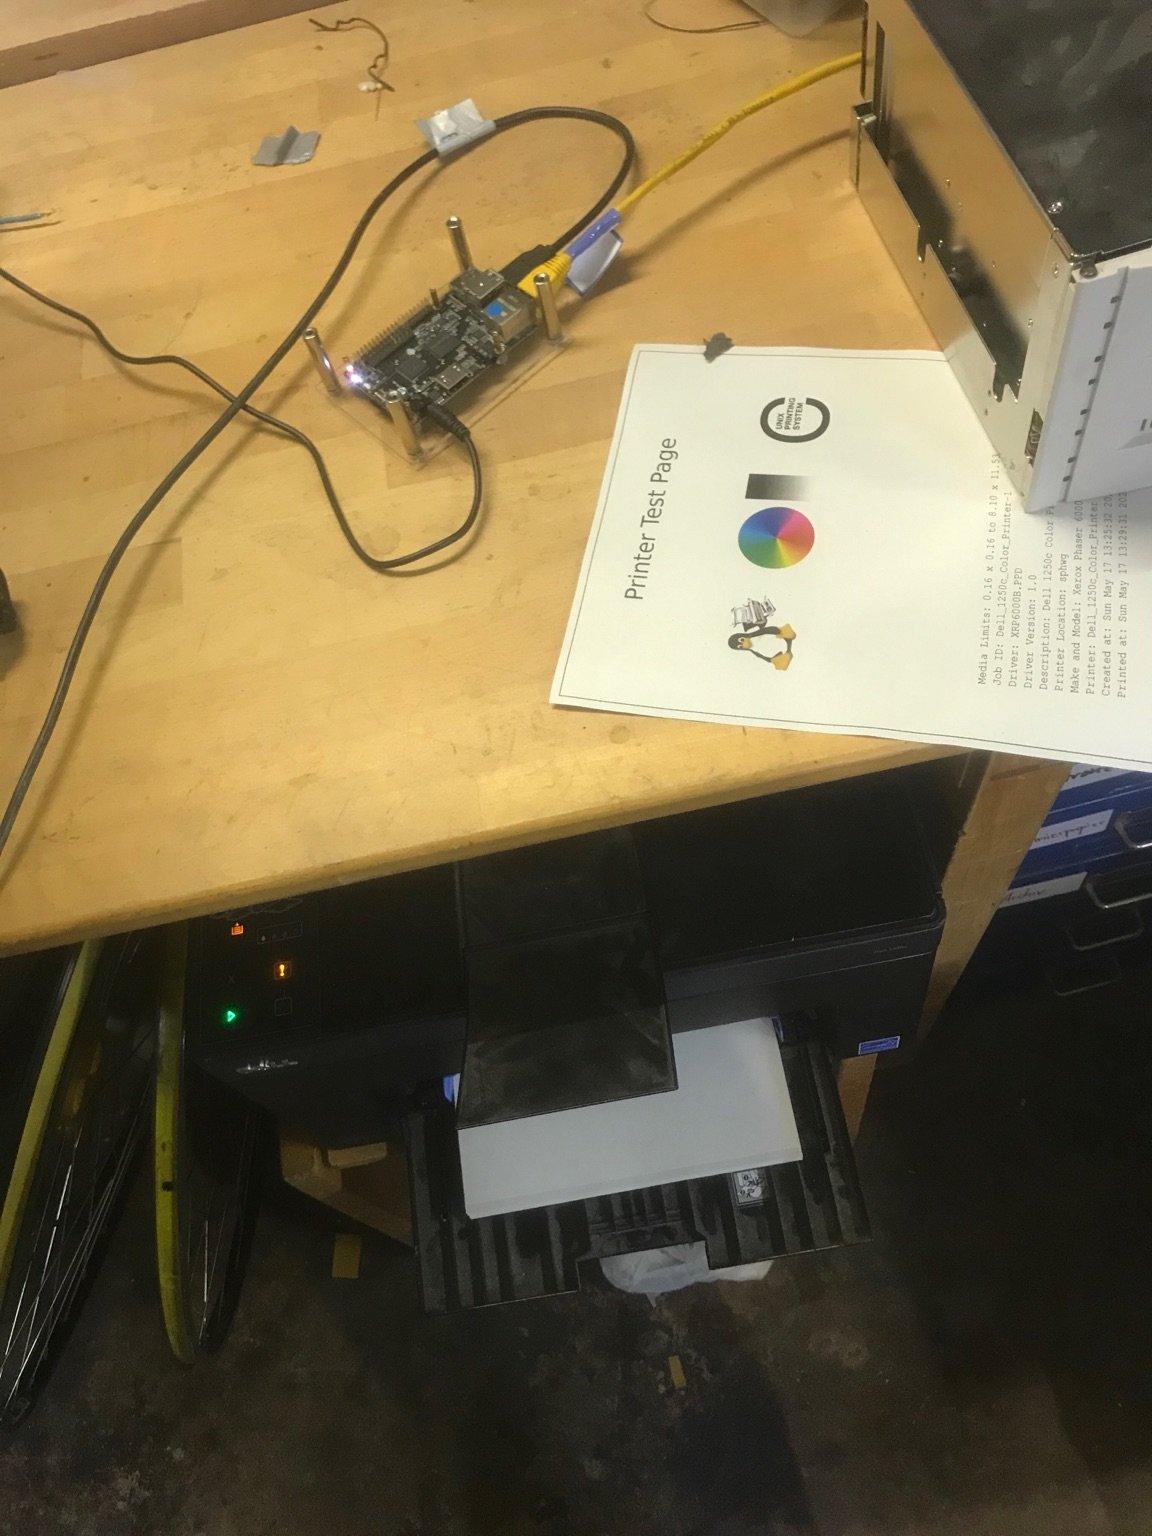 Setting up Network Printer with Raspberry Pi and CUPS